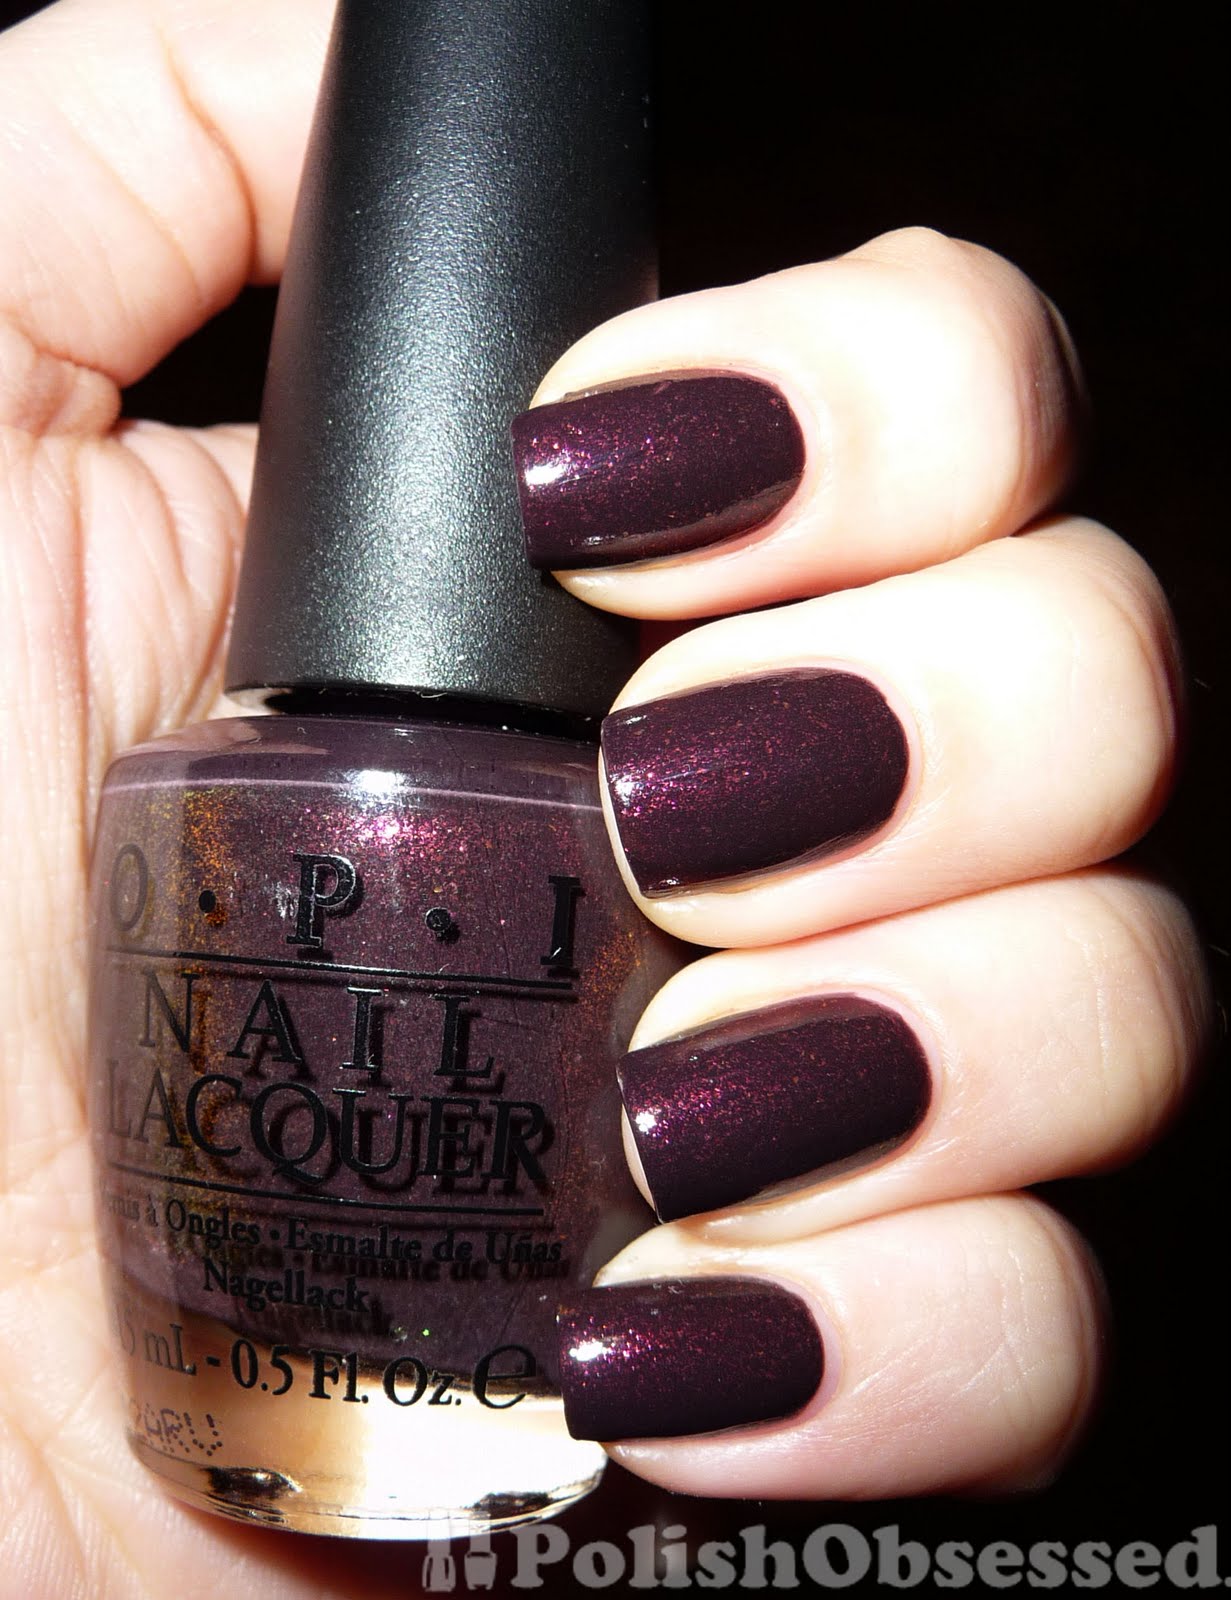 Polish Obsessed: OPI Tease-y Does It